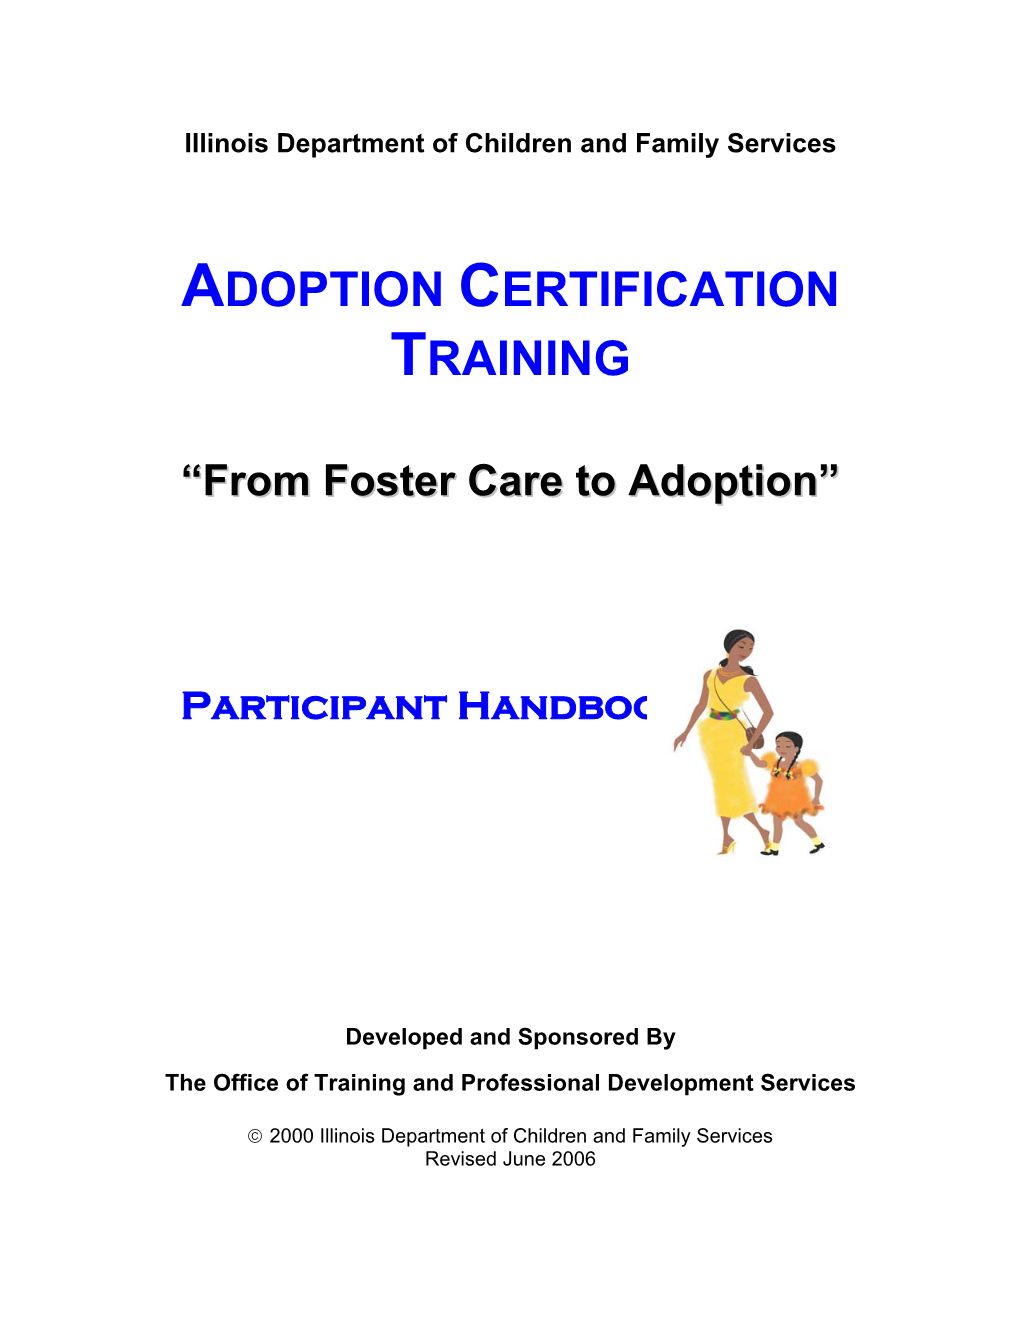 From Foster Care to Adoption”